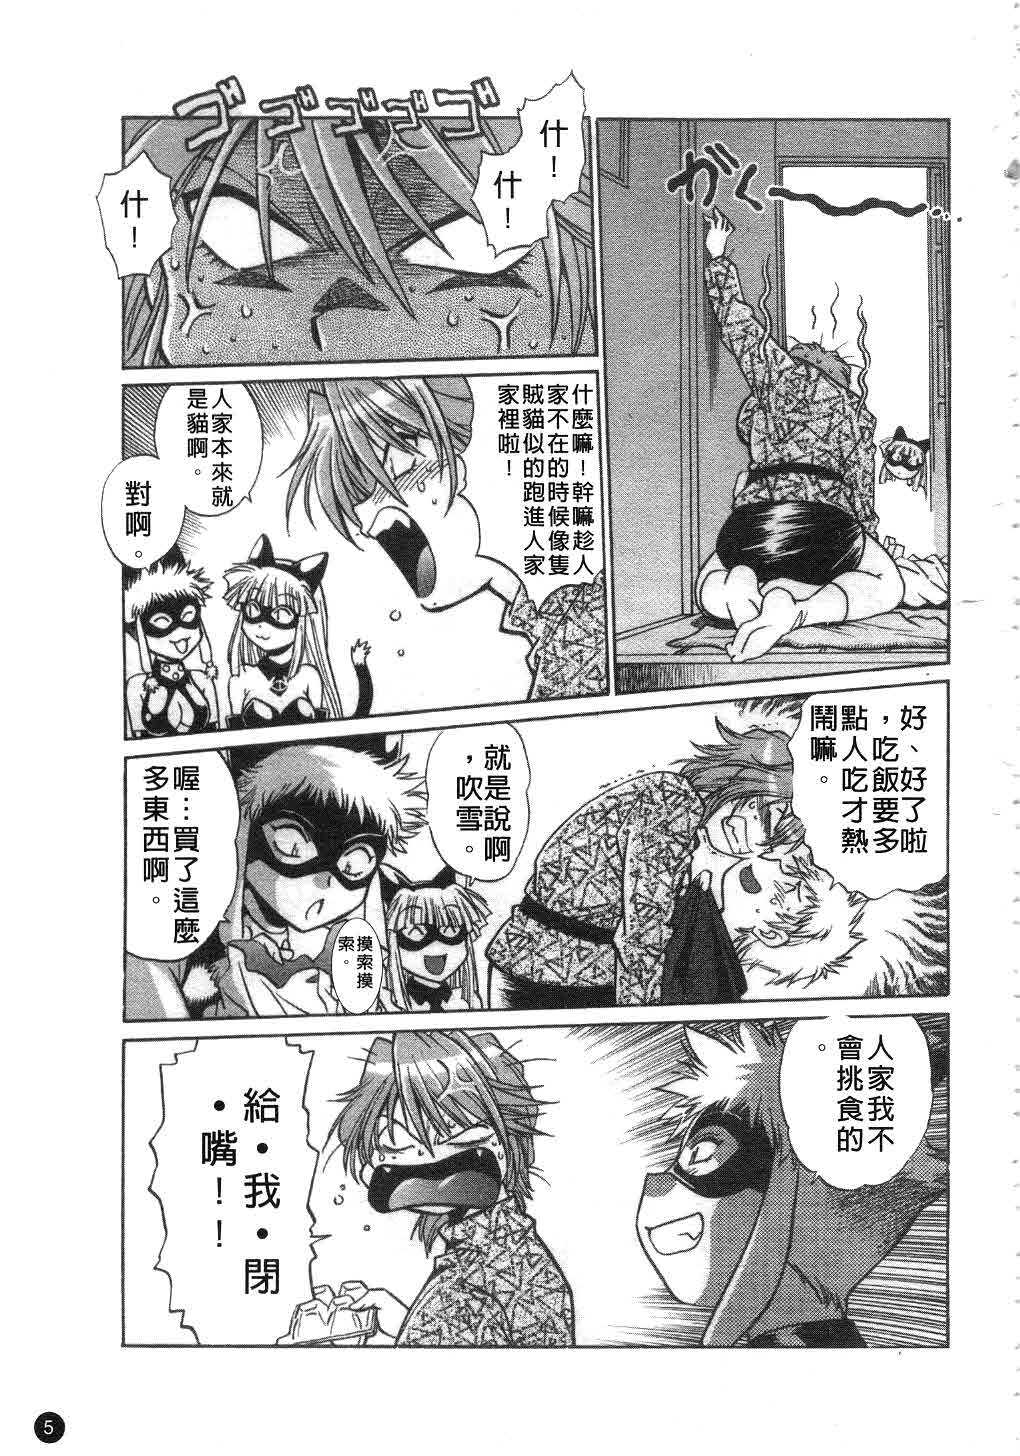 [Manabe Jouji] Tail Chaser 2 | 貓女迷情 2 [Chinese] page 6 full